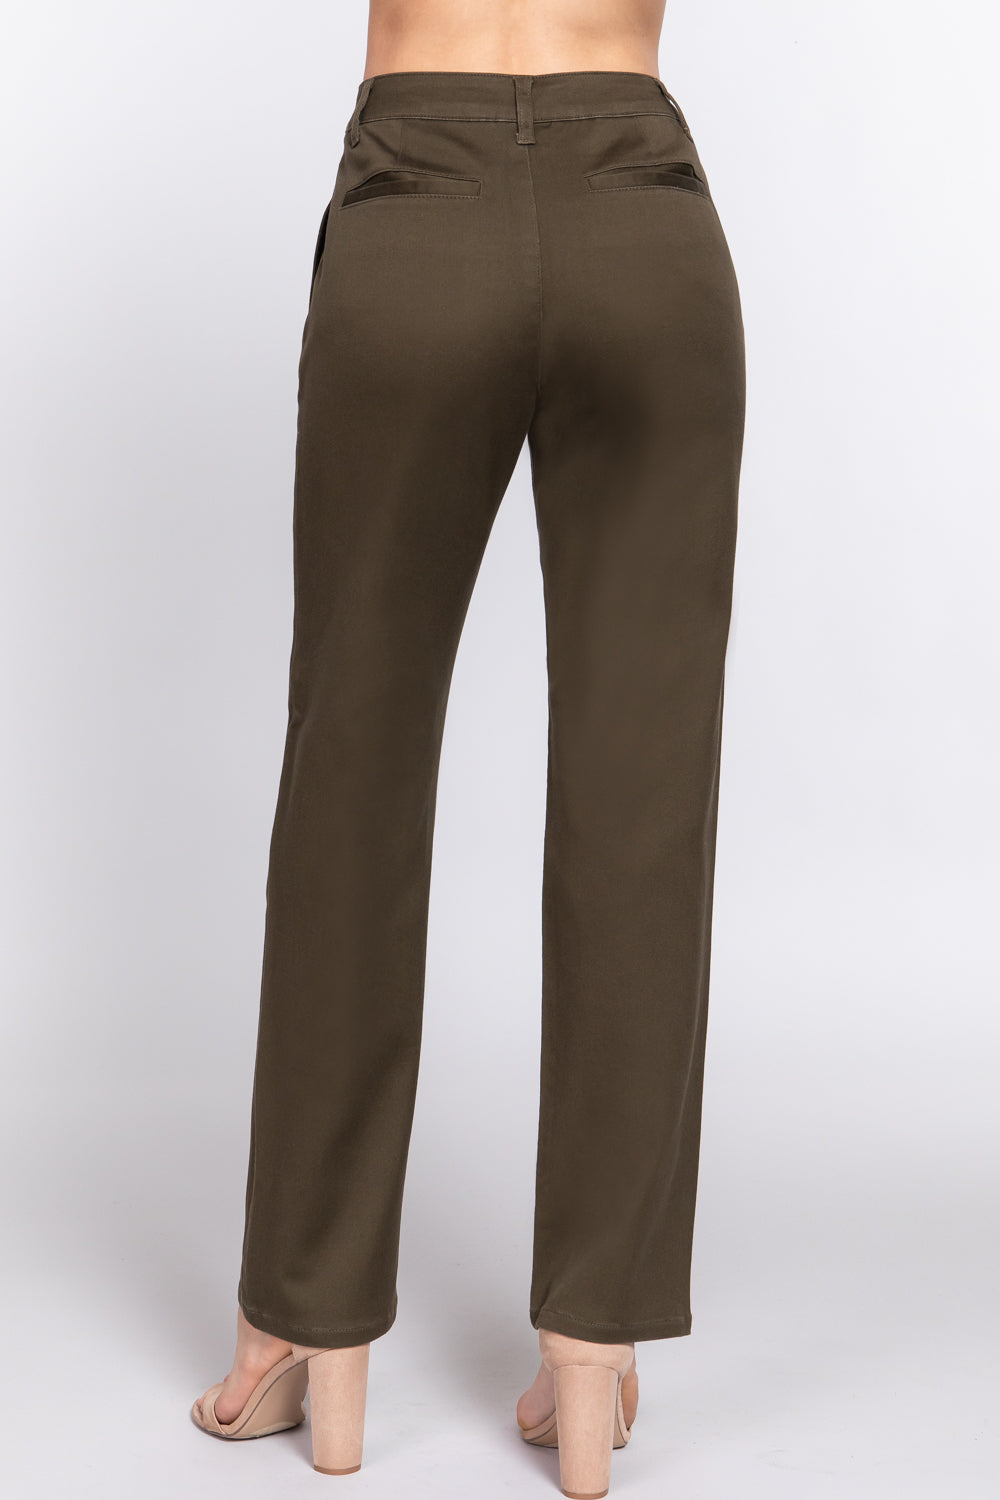 - Straight Fit Twill Long Pants - 5 colors - womens pants at TFC&H Co.